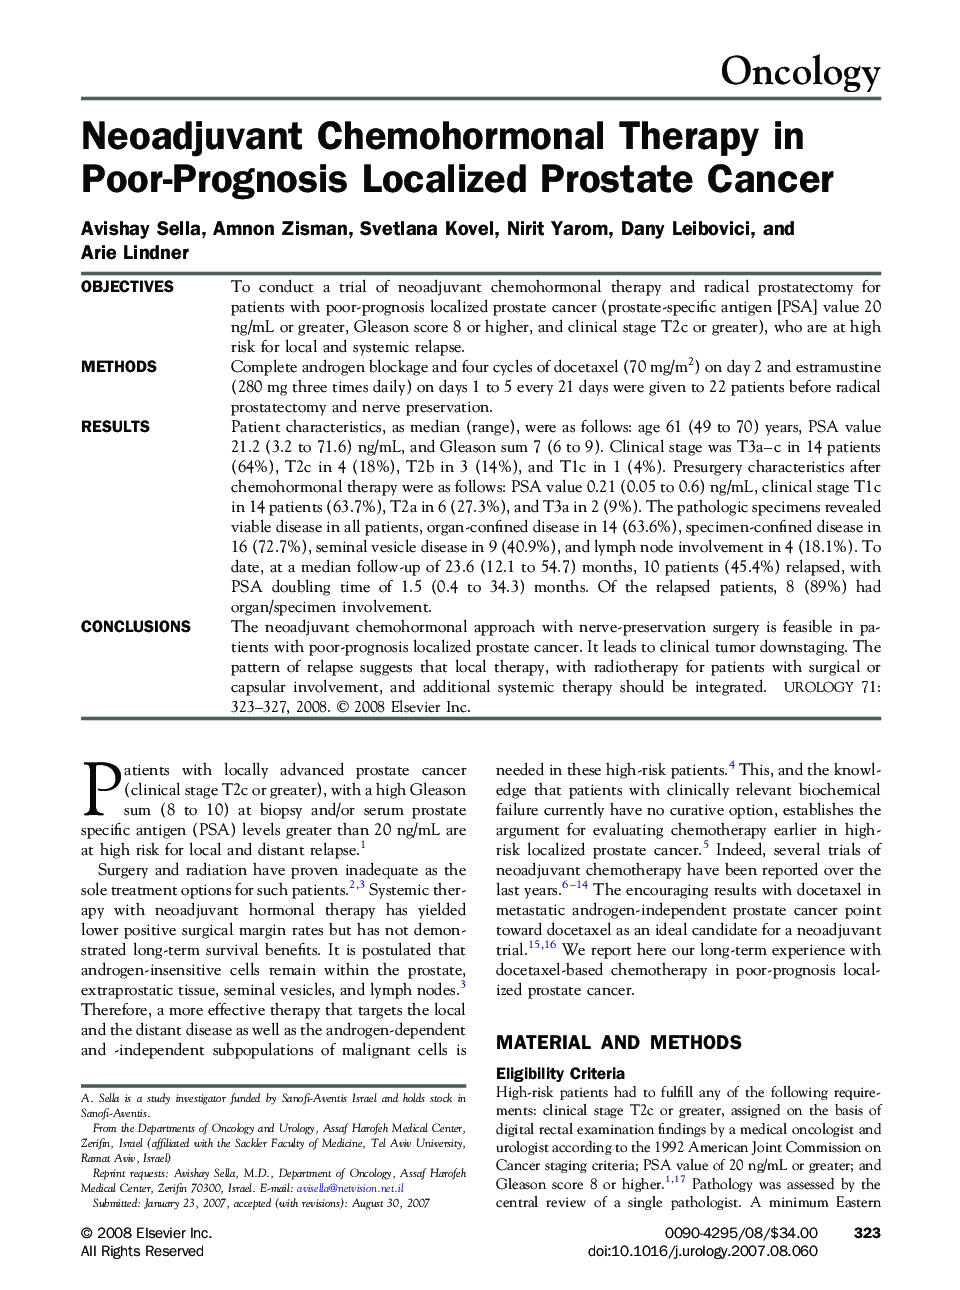 Neoadjuvant Chemohormonal Therapy in Poor-Prognosis Localized Prostate Cancer